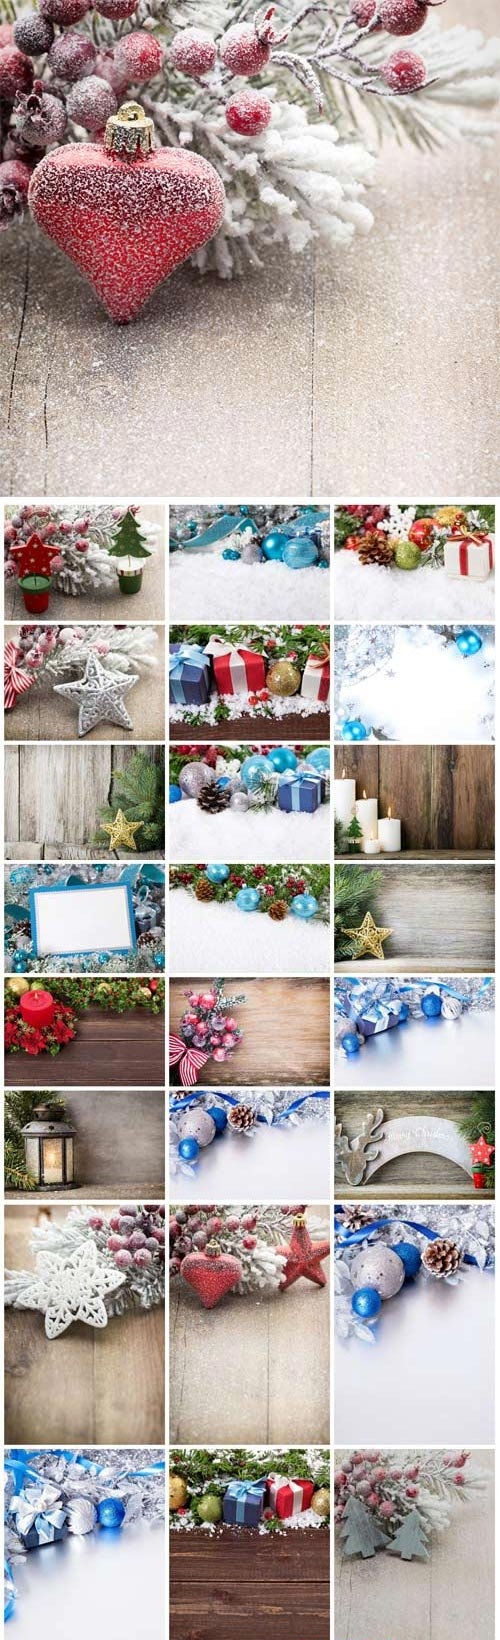 New Year and Christmas stock photos - 22